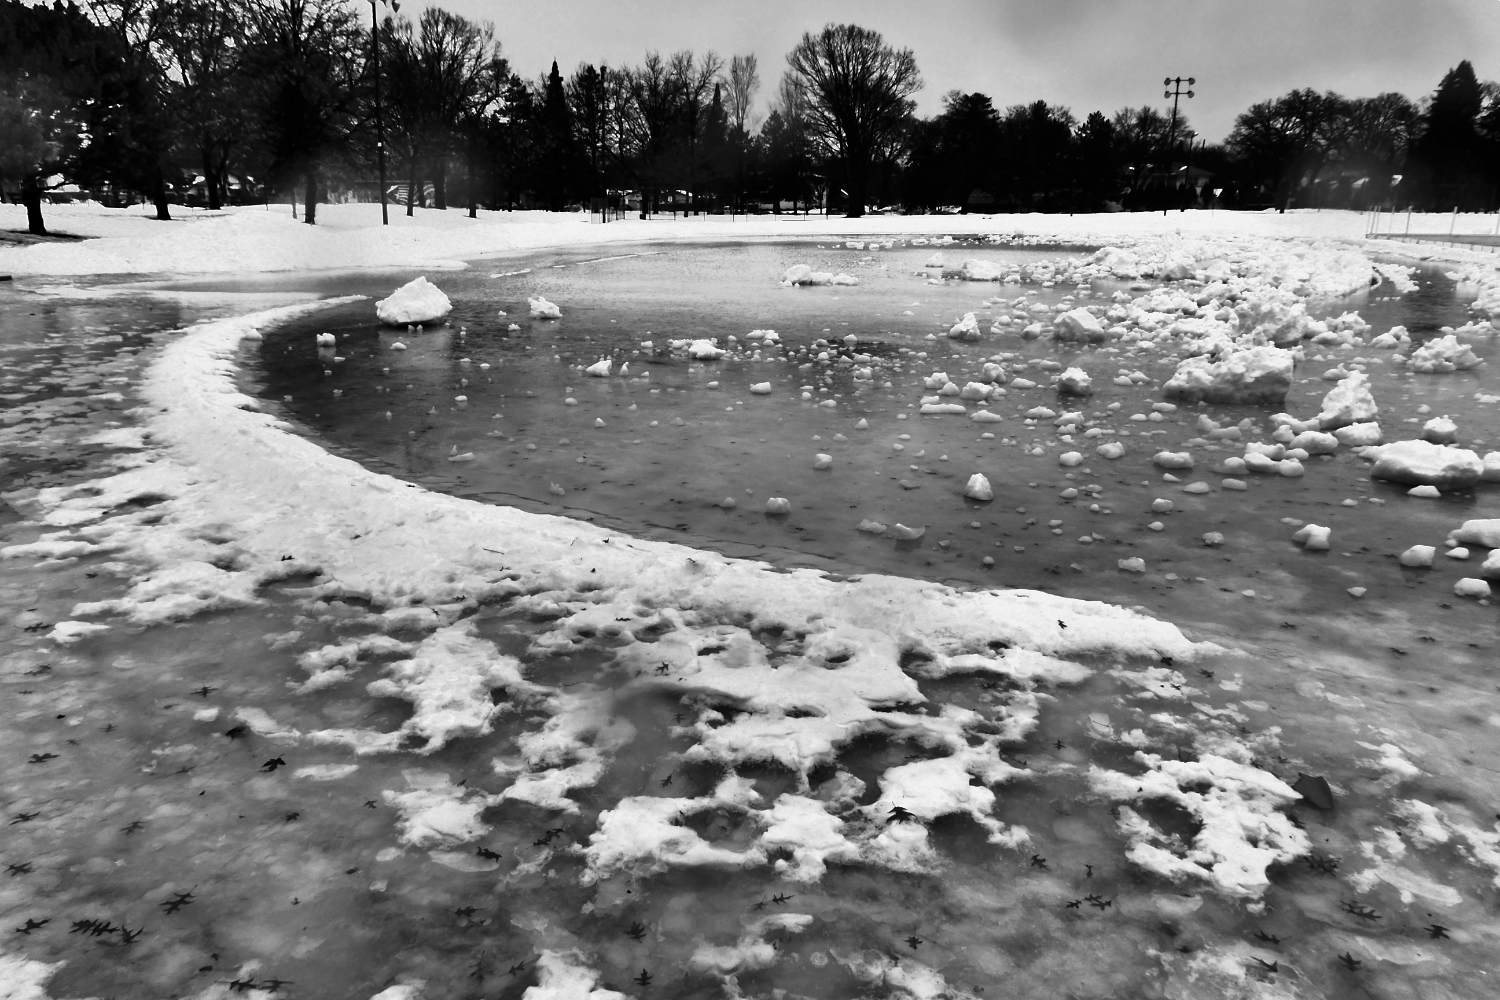 black and white image of melting ice pond in a park